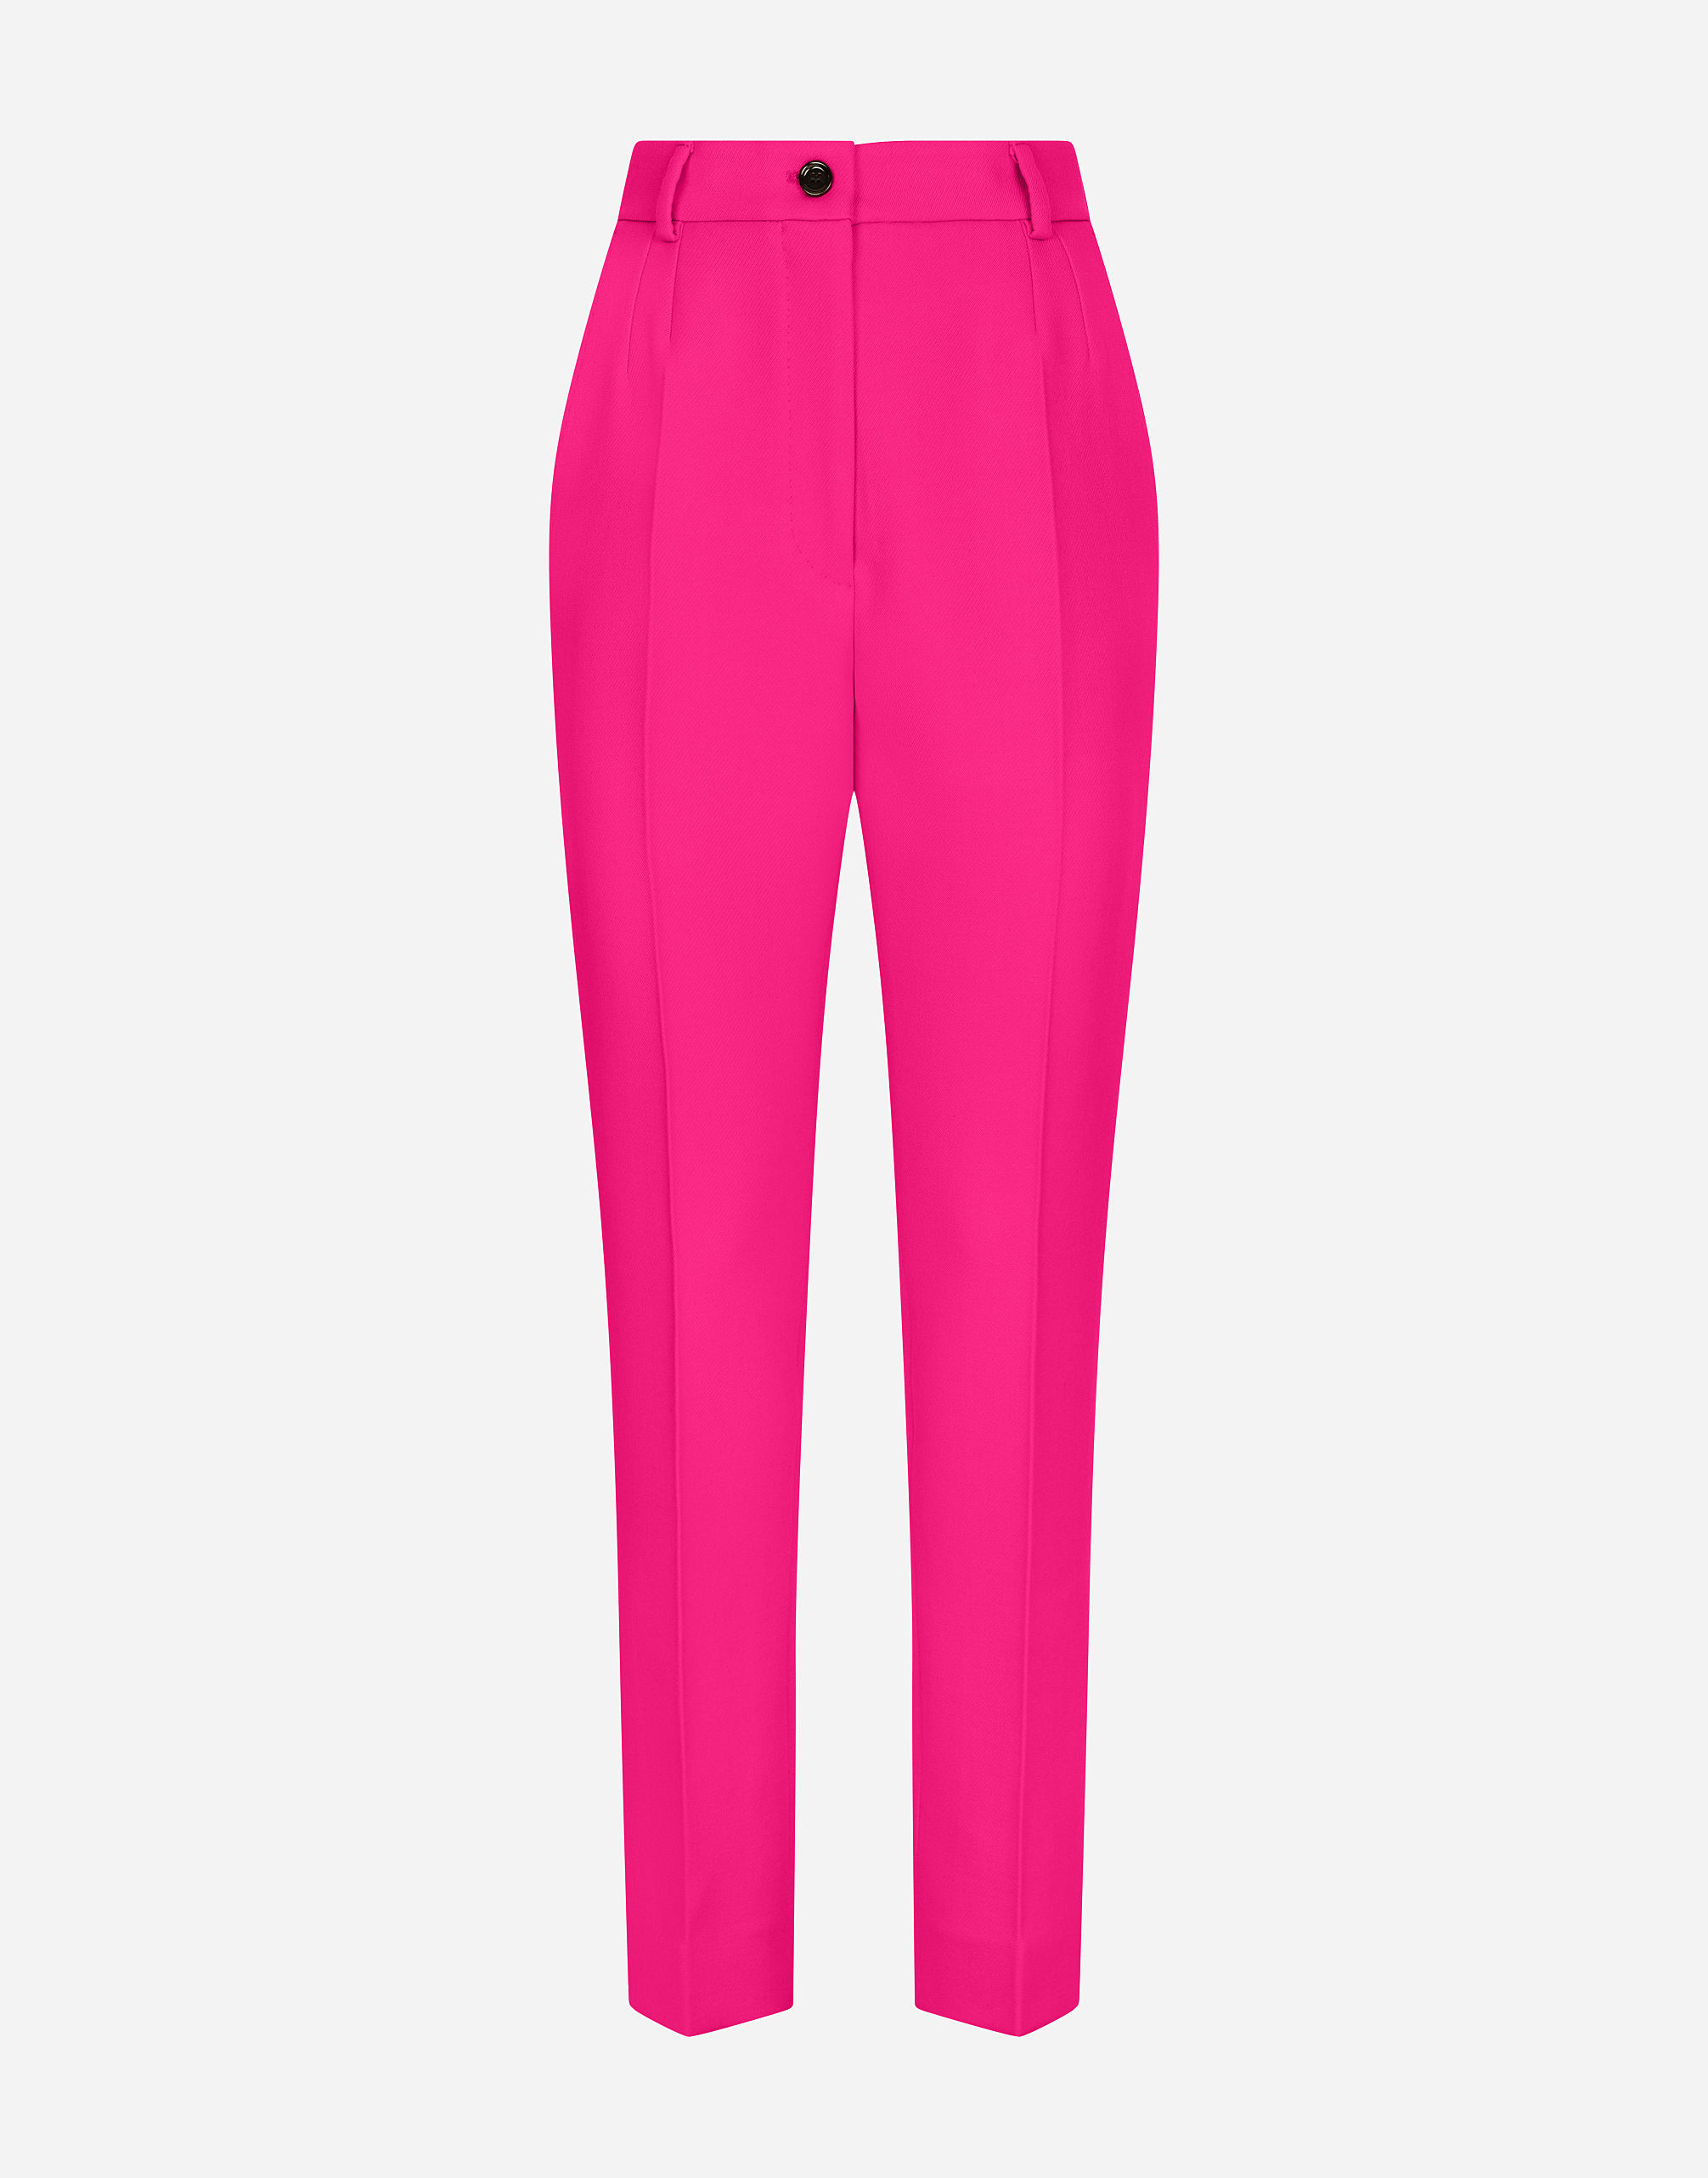 Woolen pants with slits on the hem in Fuchsia